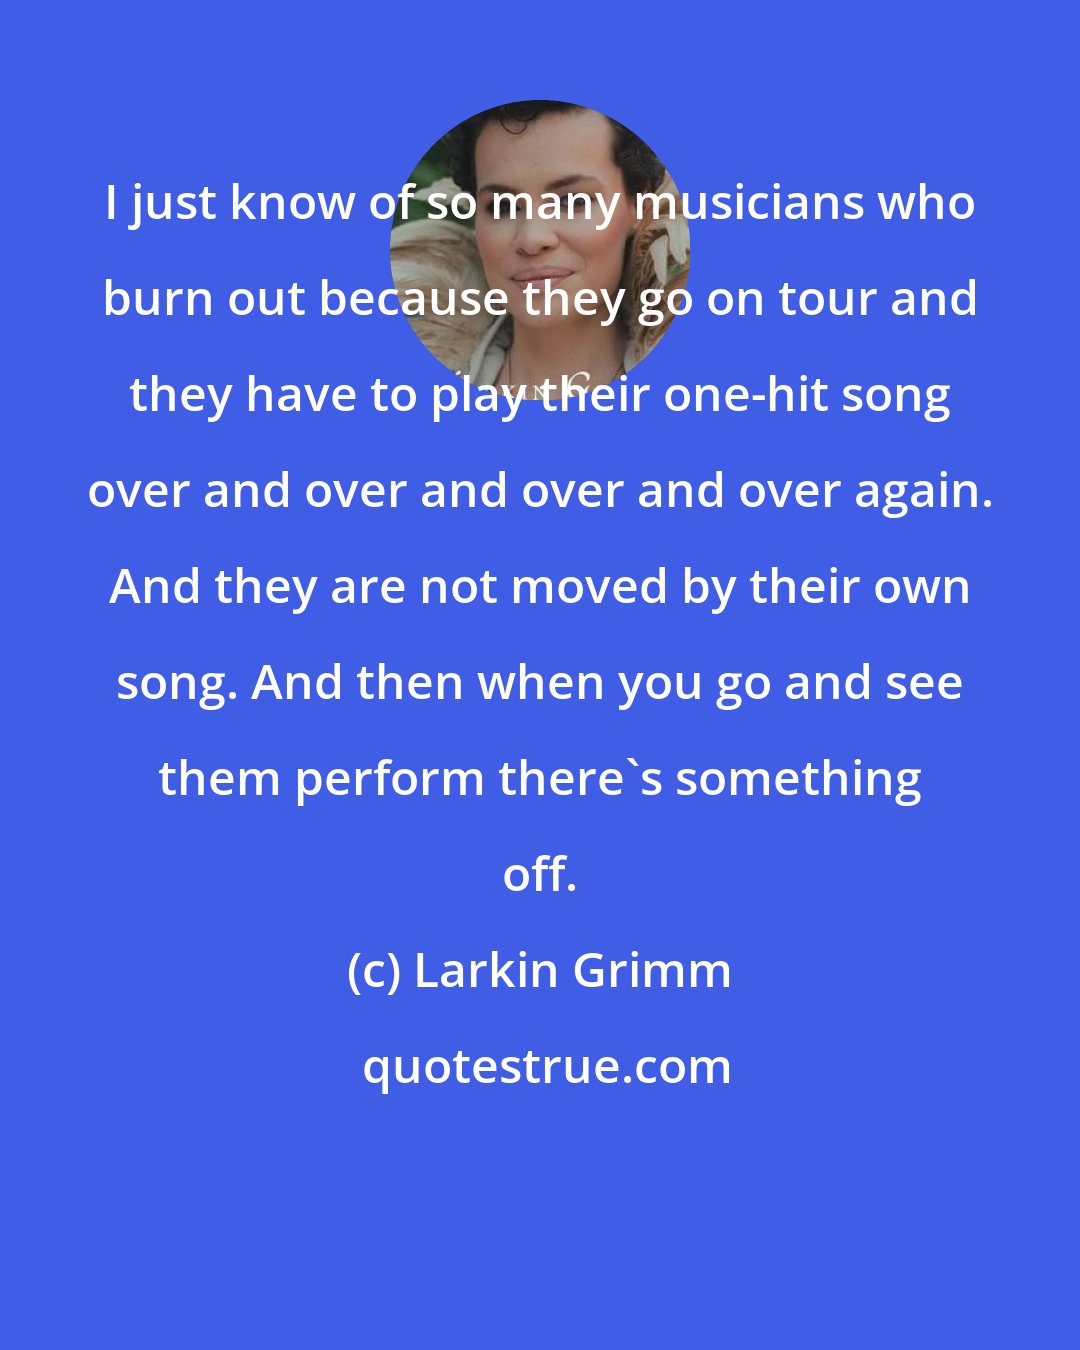 Larkin Grimm: I just know of so many musicians who burn out because they go on tour and they have to play their one-hit song over and over and over and over again. And they are not moved by their own song. And then when you go and see them perform there's something off.